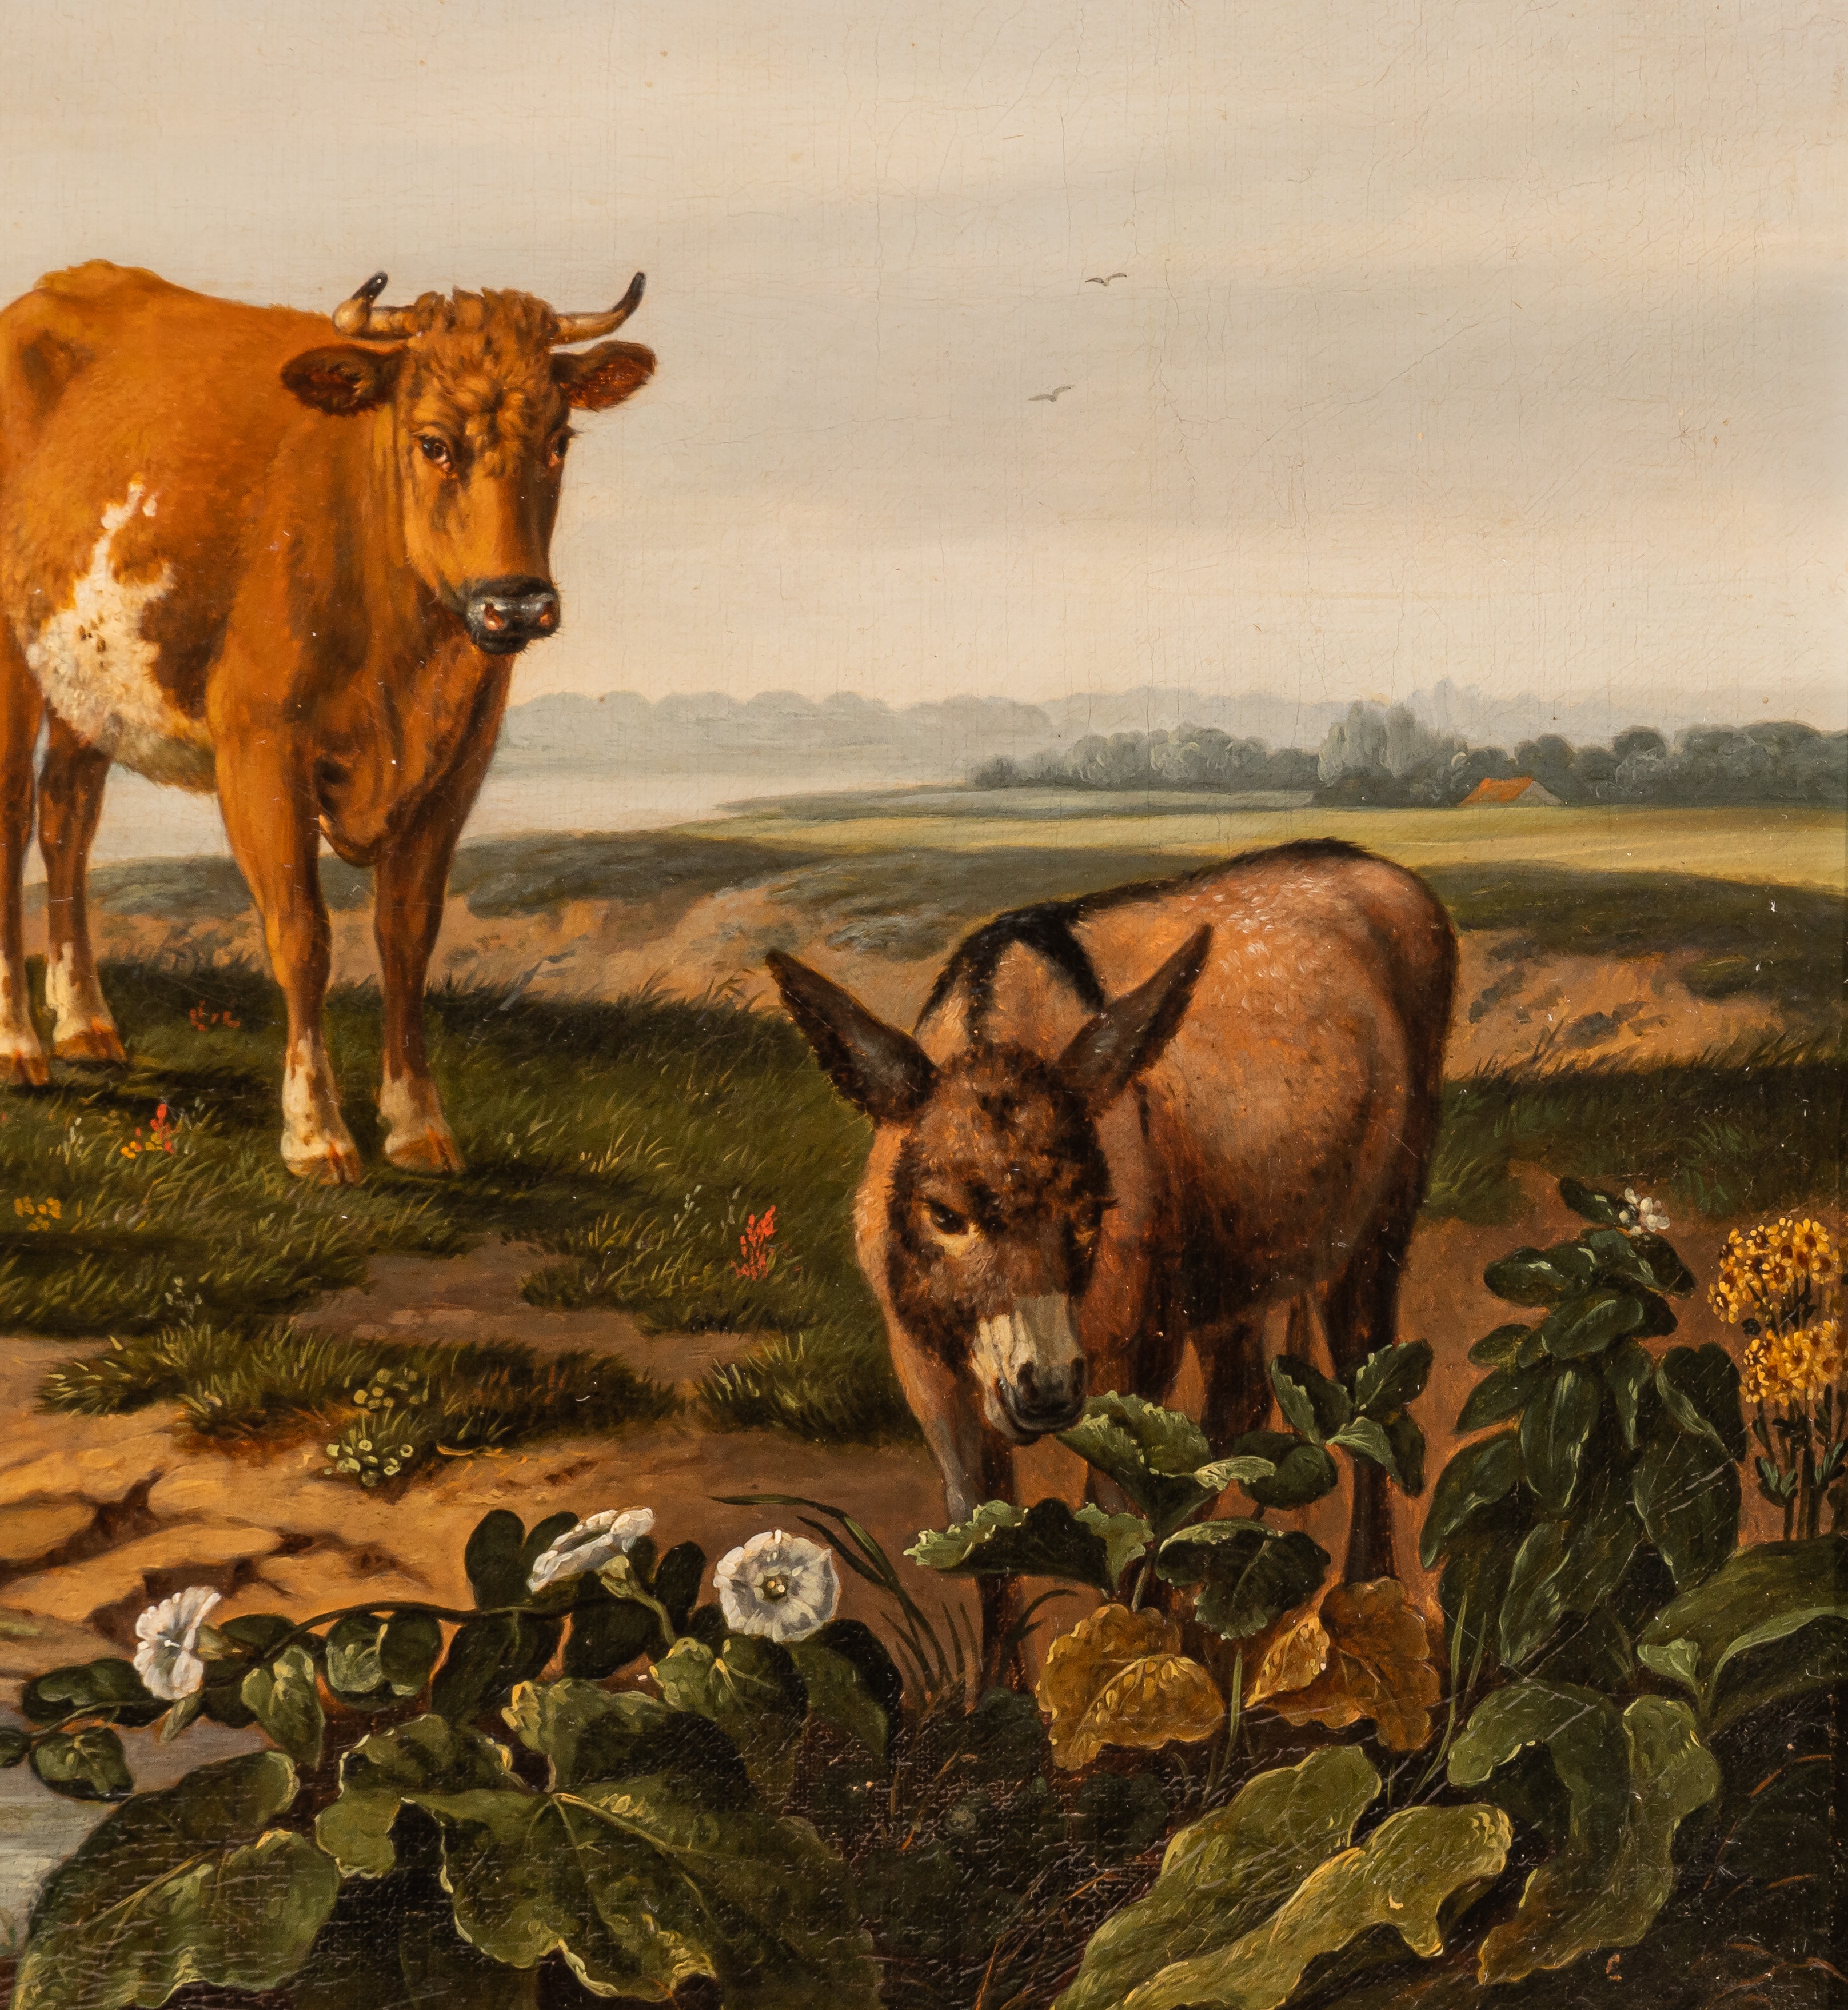 Abraham Bruiningh van Worrell (1787-1832), resting cattle in a landscape, oil on canvas, 51,5 x 63 c - Image 6 of 6